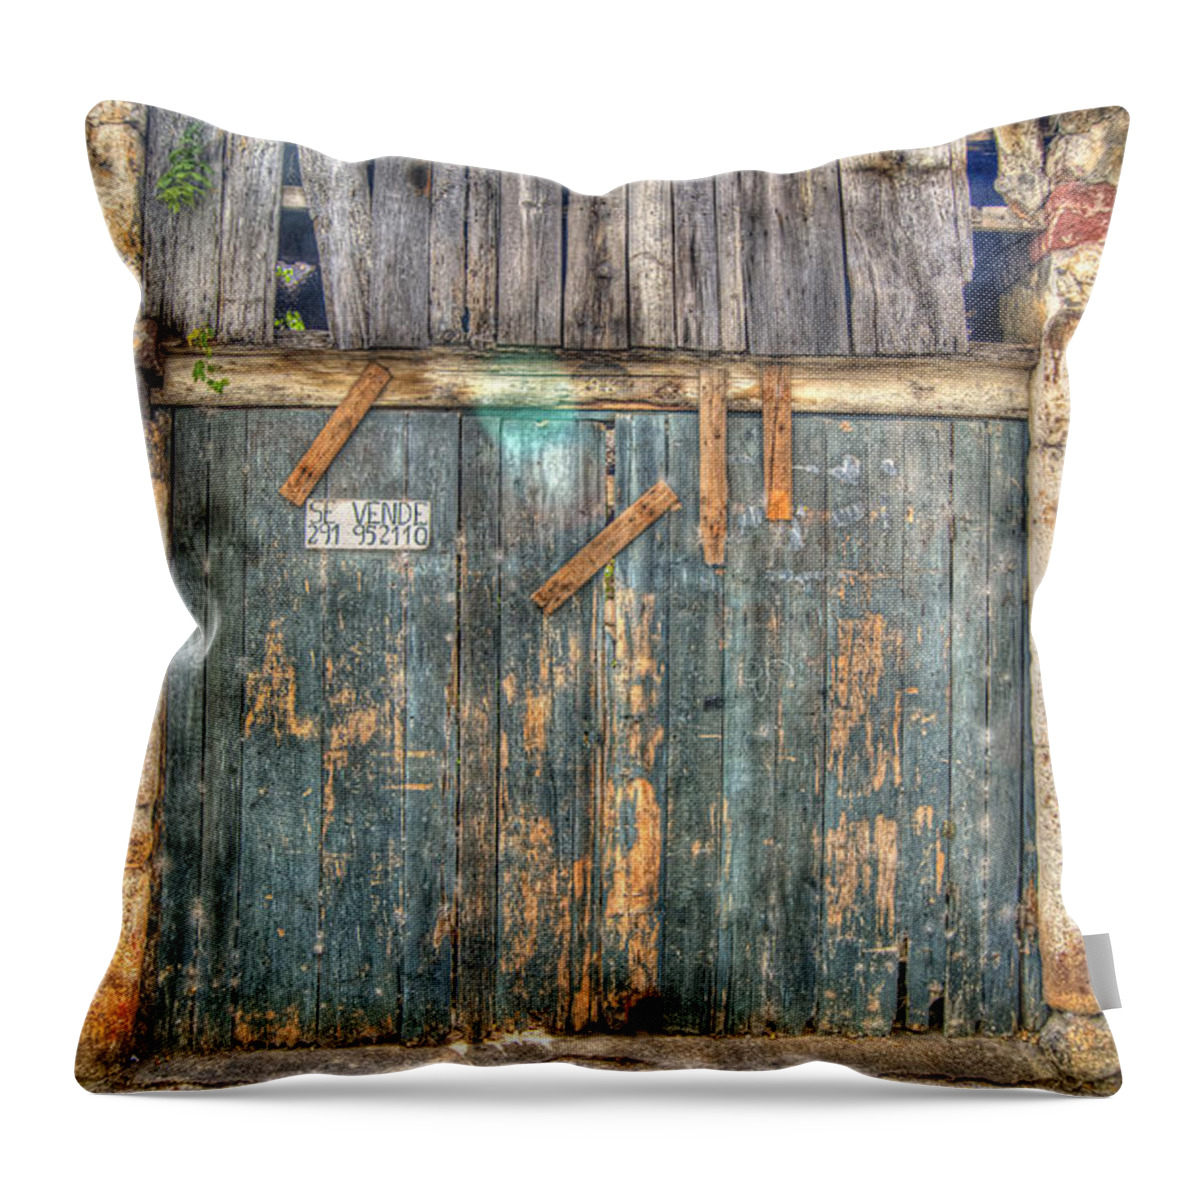 Derelict Throw Pillow featuring the photograph Se Vende by David Birchall